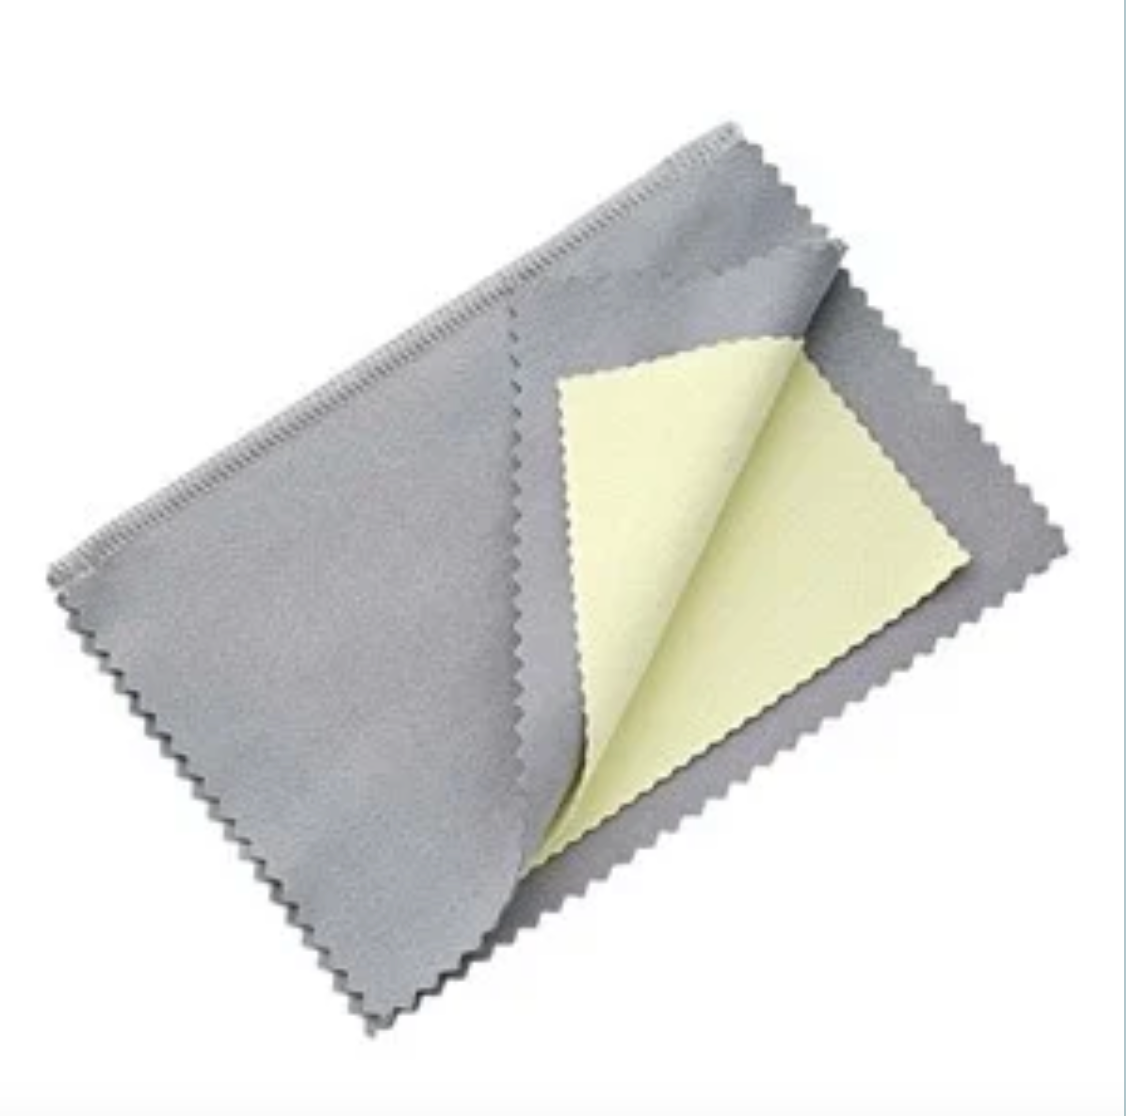 Jewelry Cleaning Cloth - Moderate Abrasive